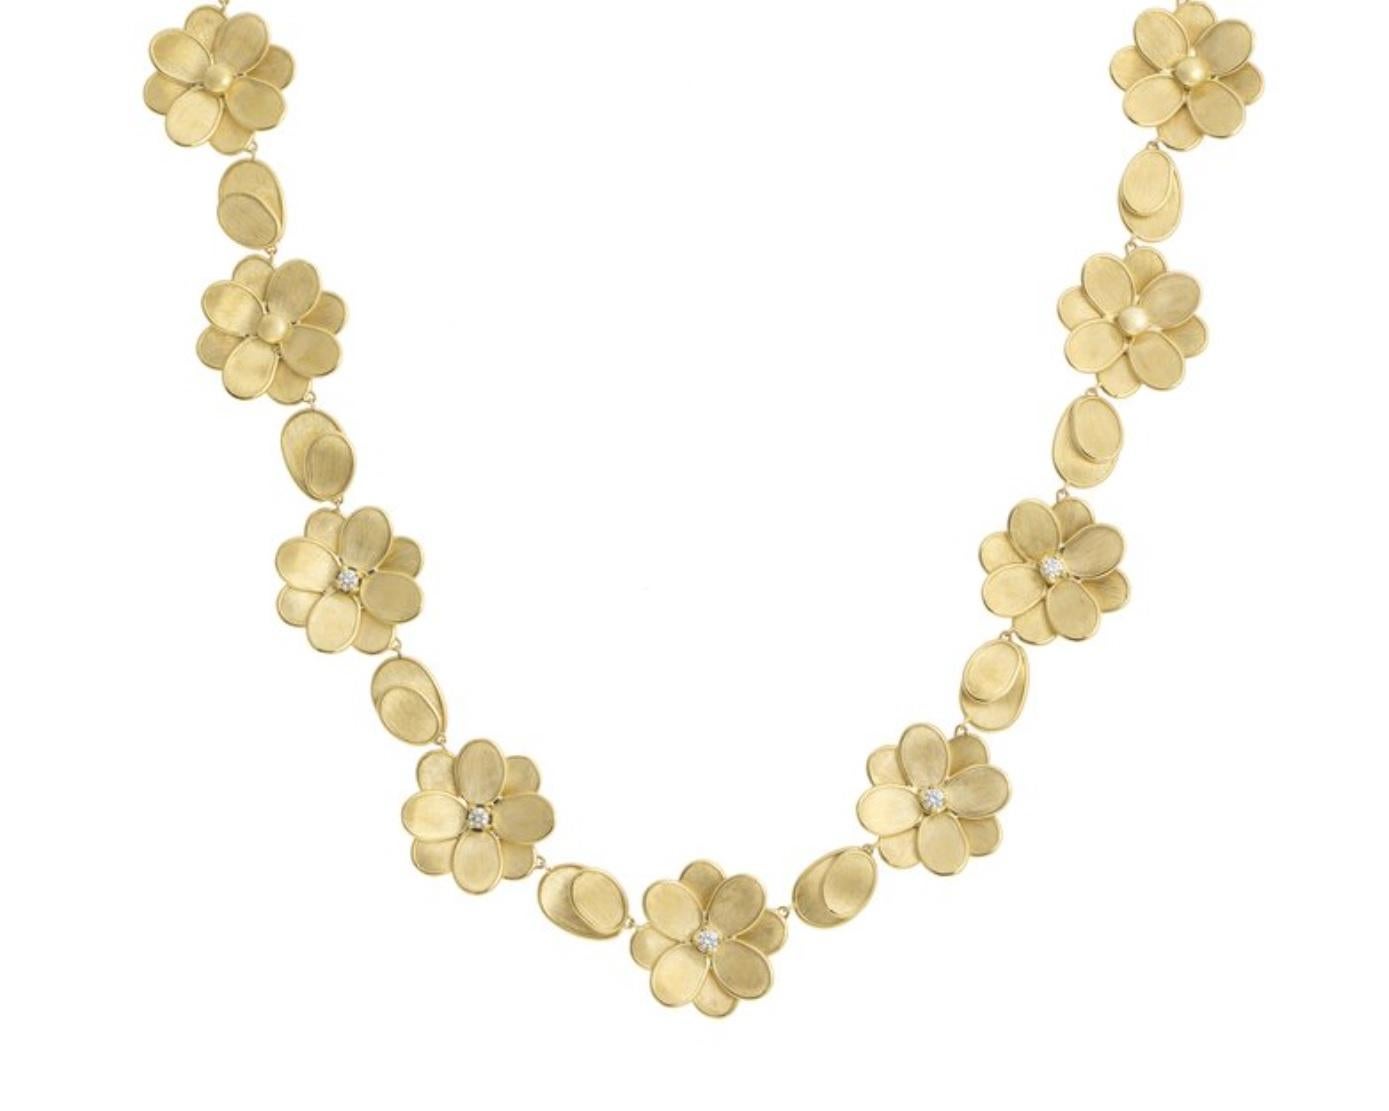 Marco Bicego Petali Yellow Gold & Diamonds Ladies Necklace CB2441 B Y 02 In New Condition For Sale In Wilmington, DE